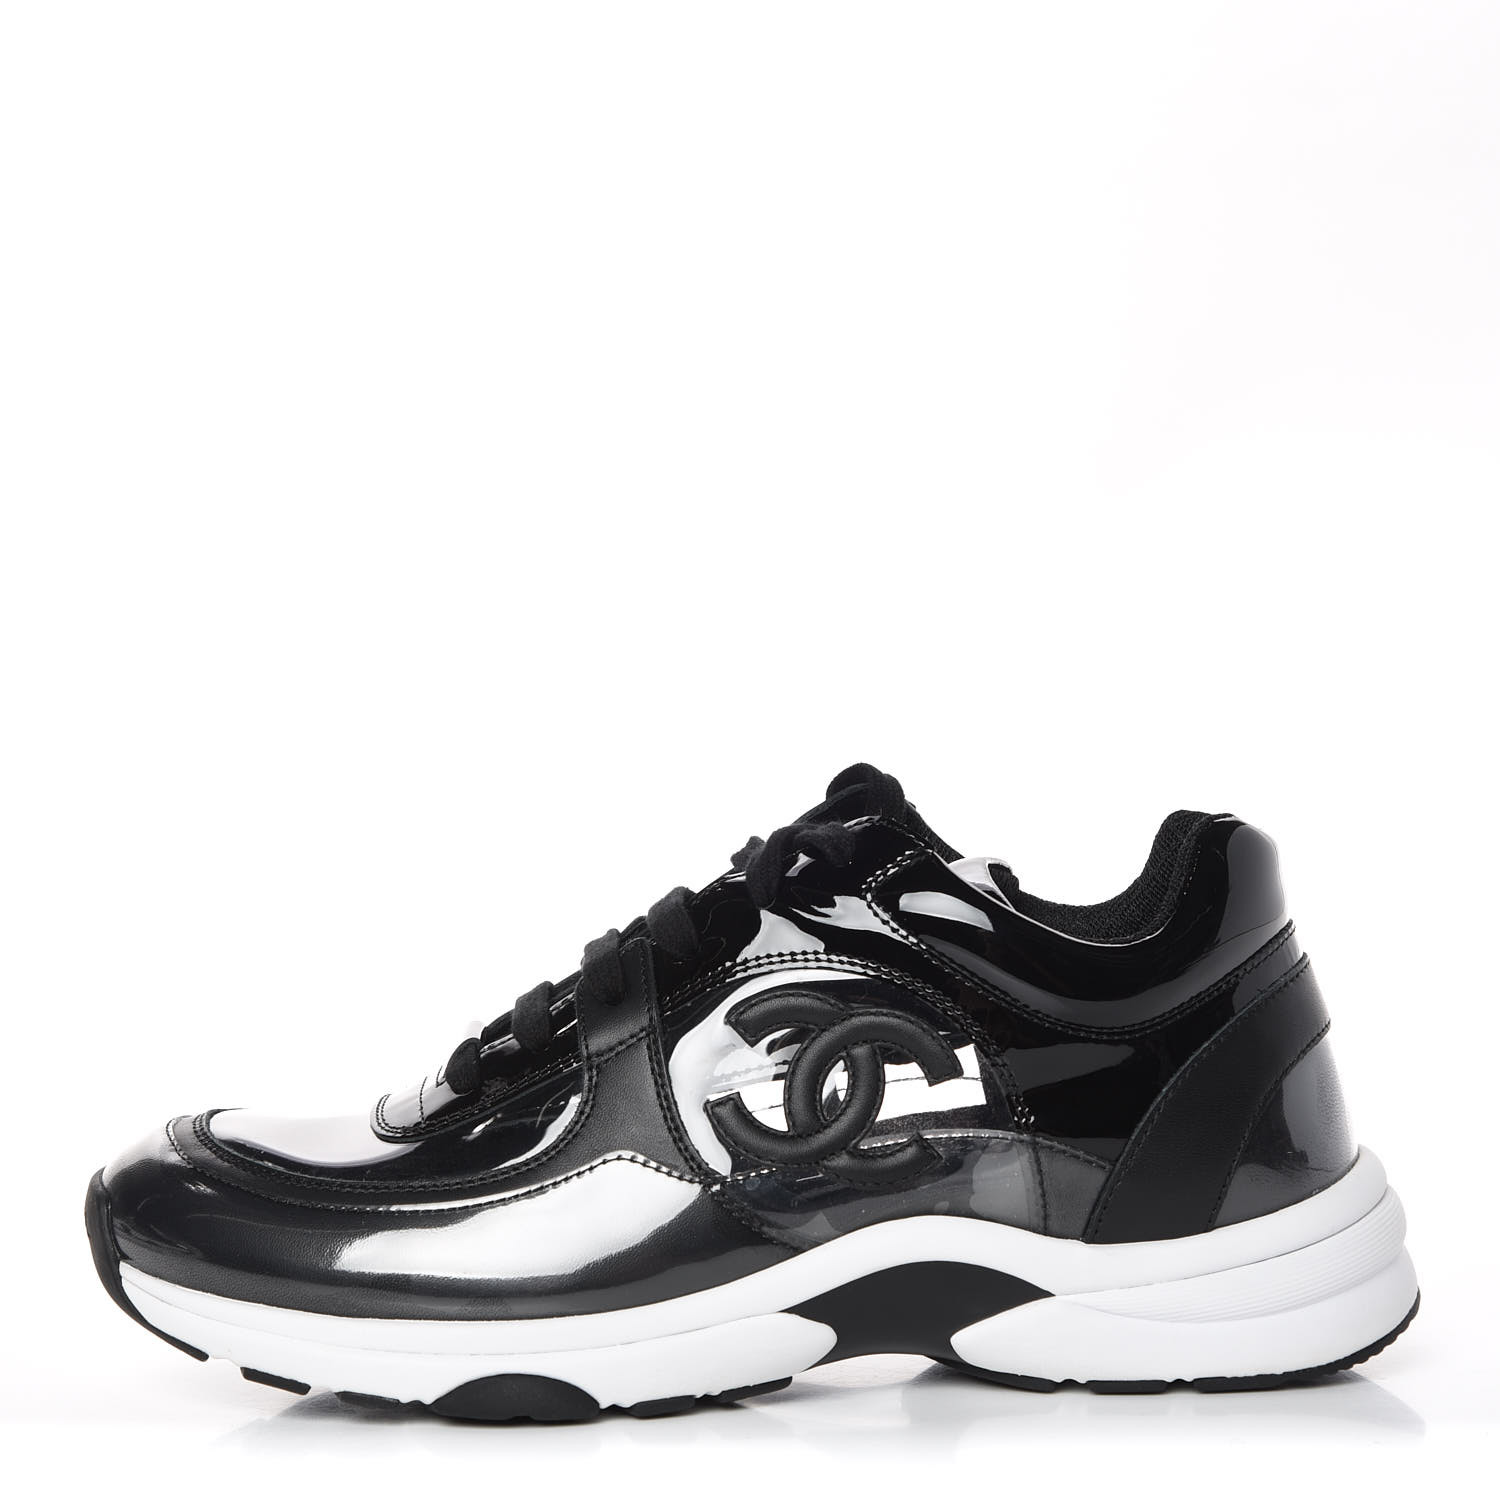 chanel white clear sneakers